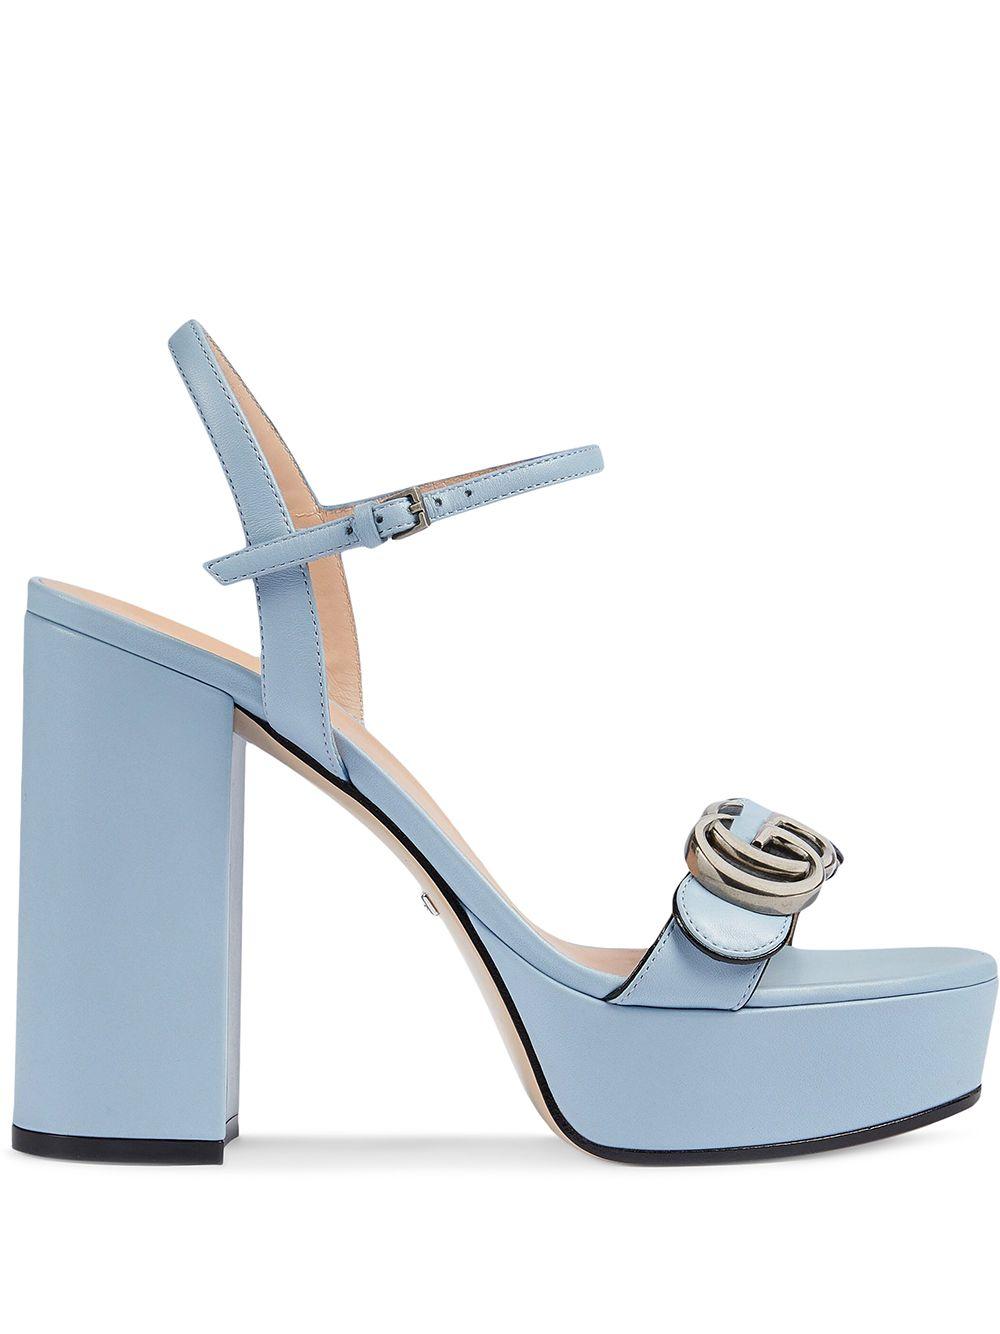 Gucci Platform Sandal With Double G in Blue | Lyst